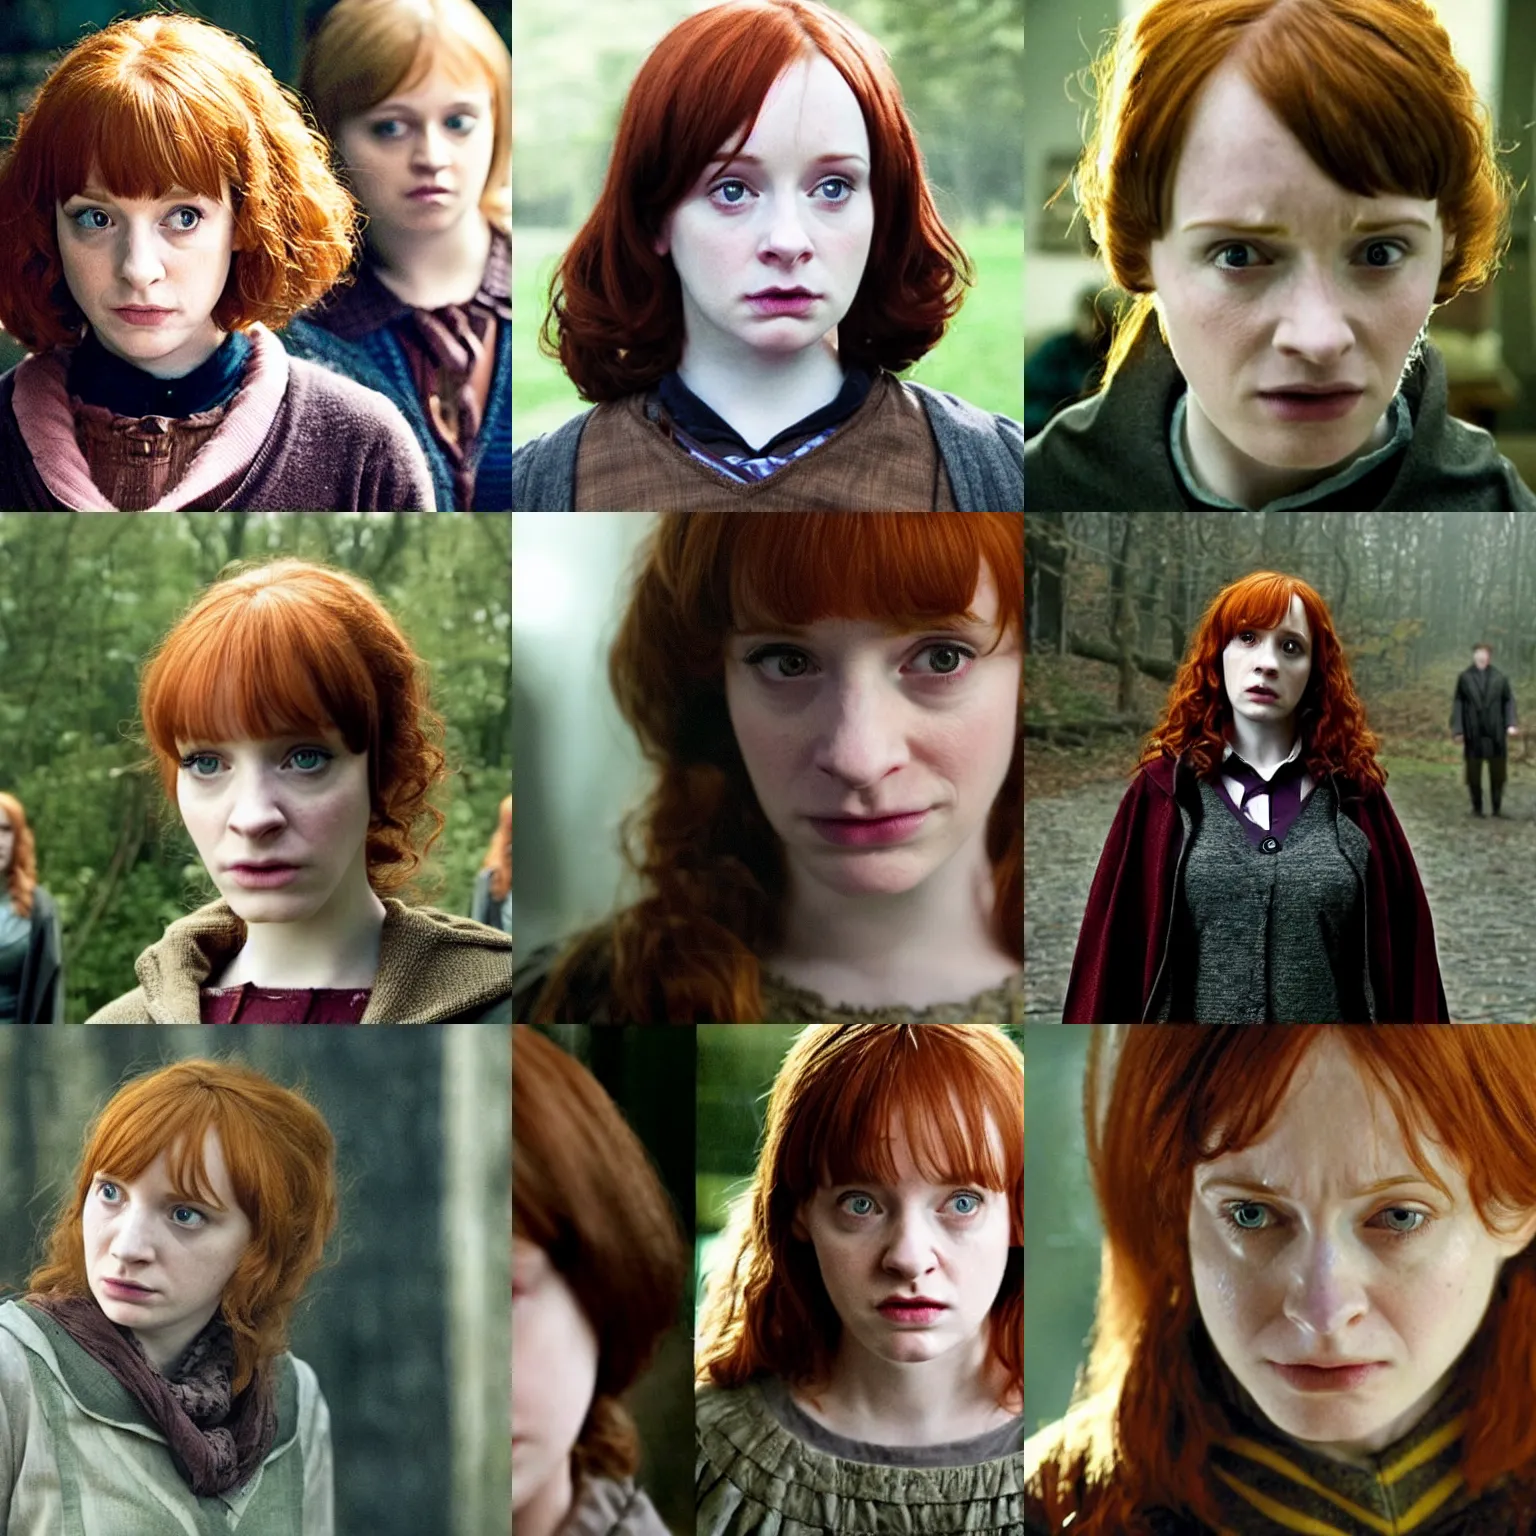 Prompt: sad female harry potter played by young christina hendricks, movie still from harry potter deathly hallows by david yates, defined facial features, symmetrical facial features.